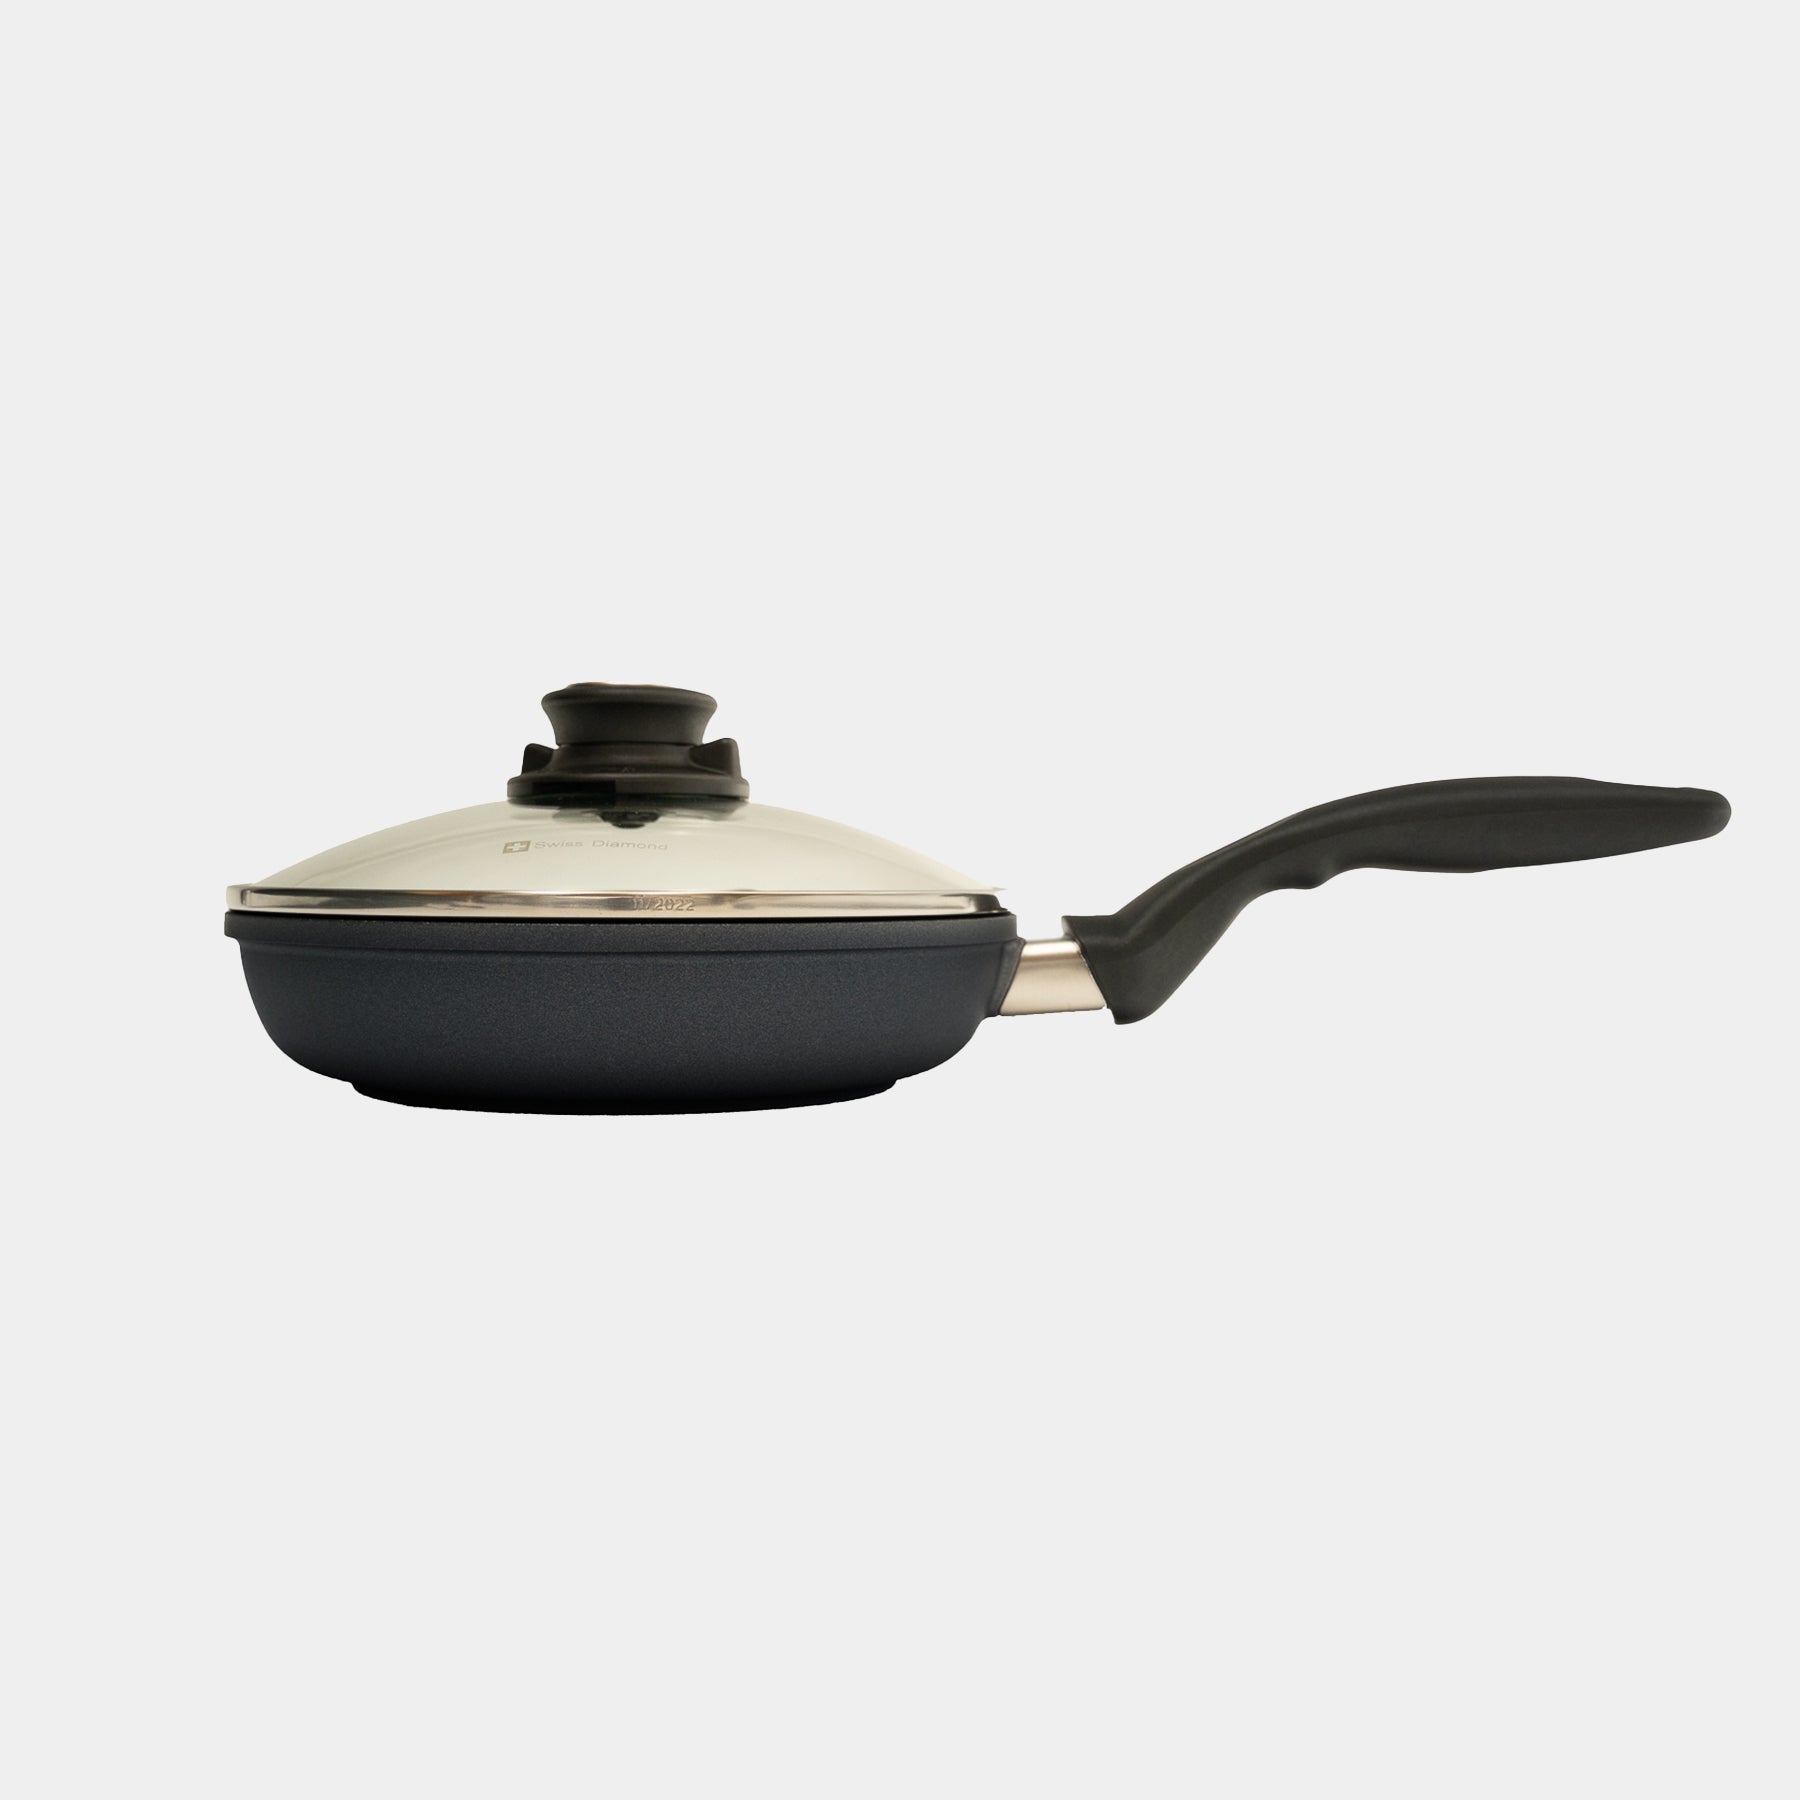 HD Nonstick Fry Pan with Glass Lid in use side view